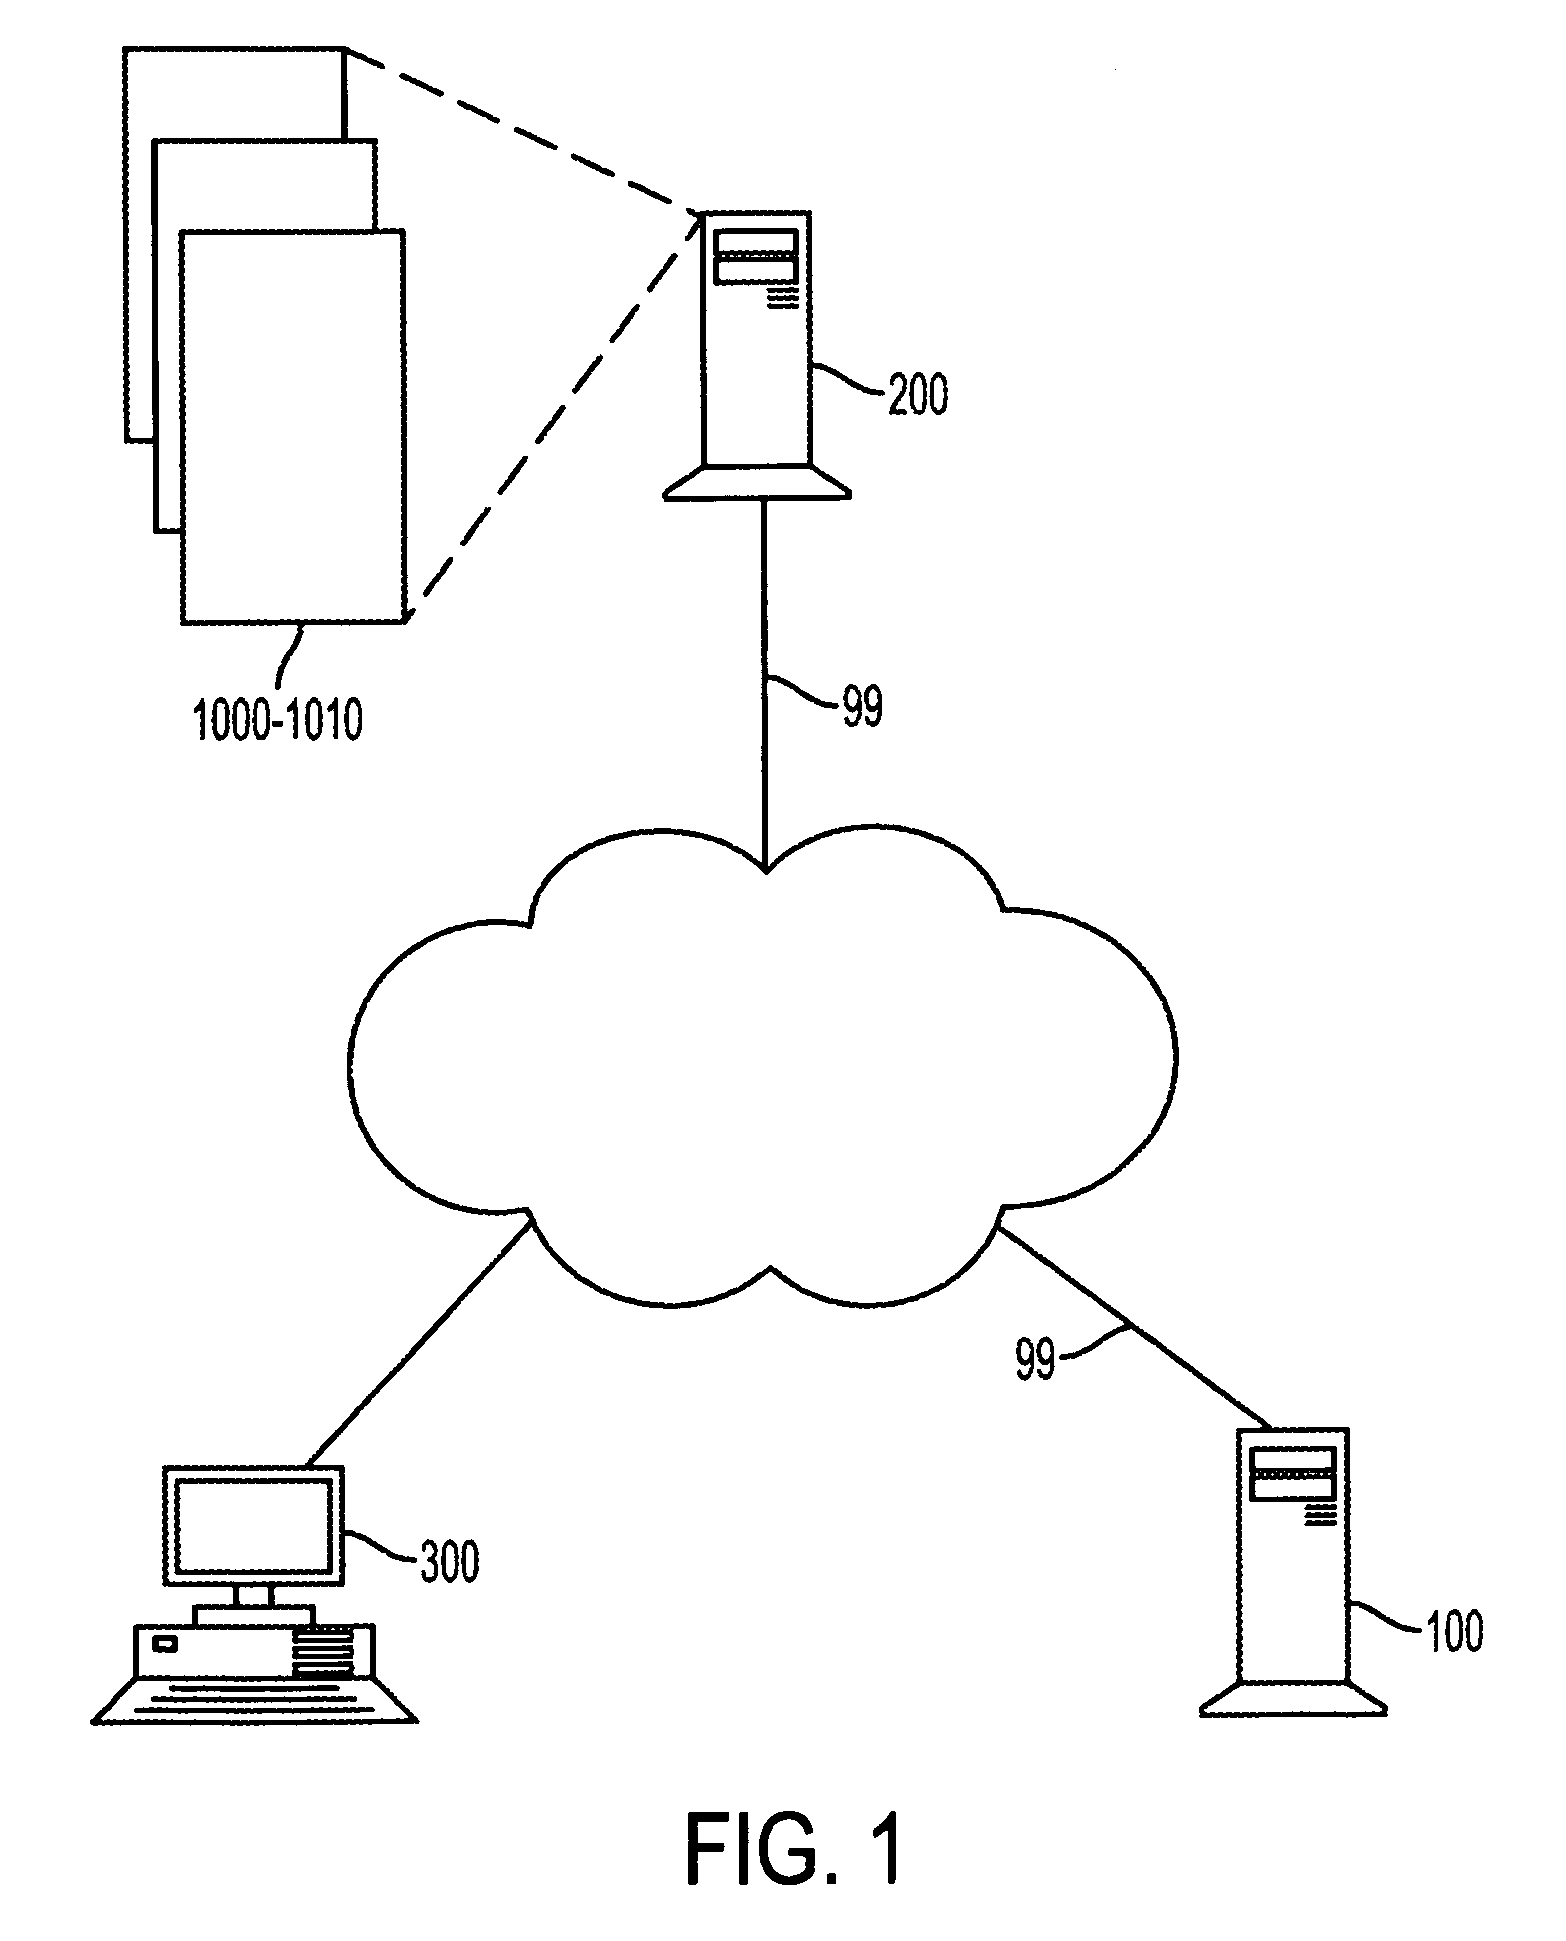 Systems and methods for detecting entailment and contradiction